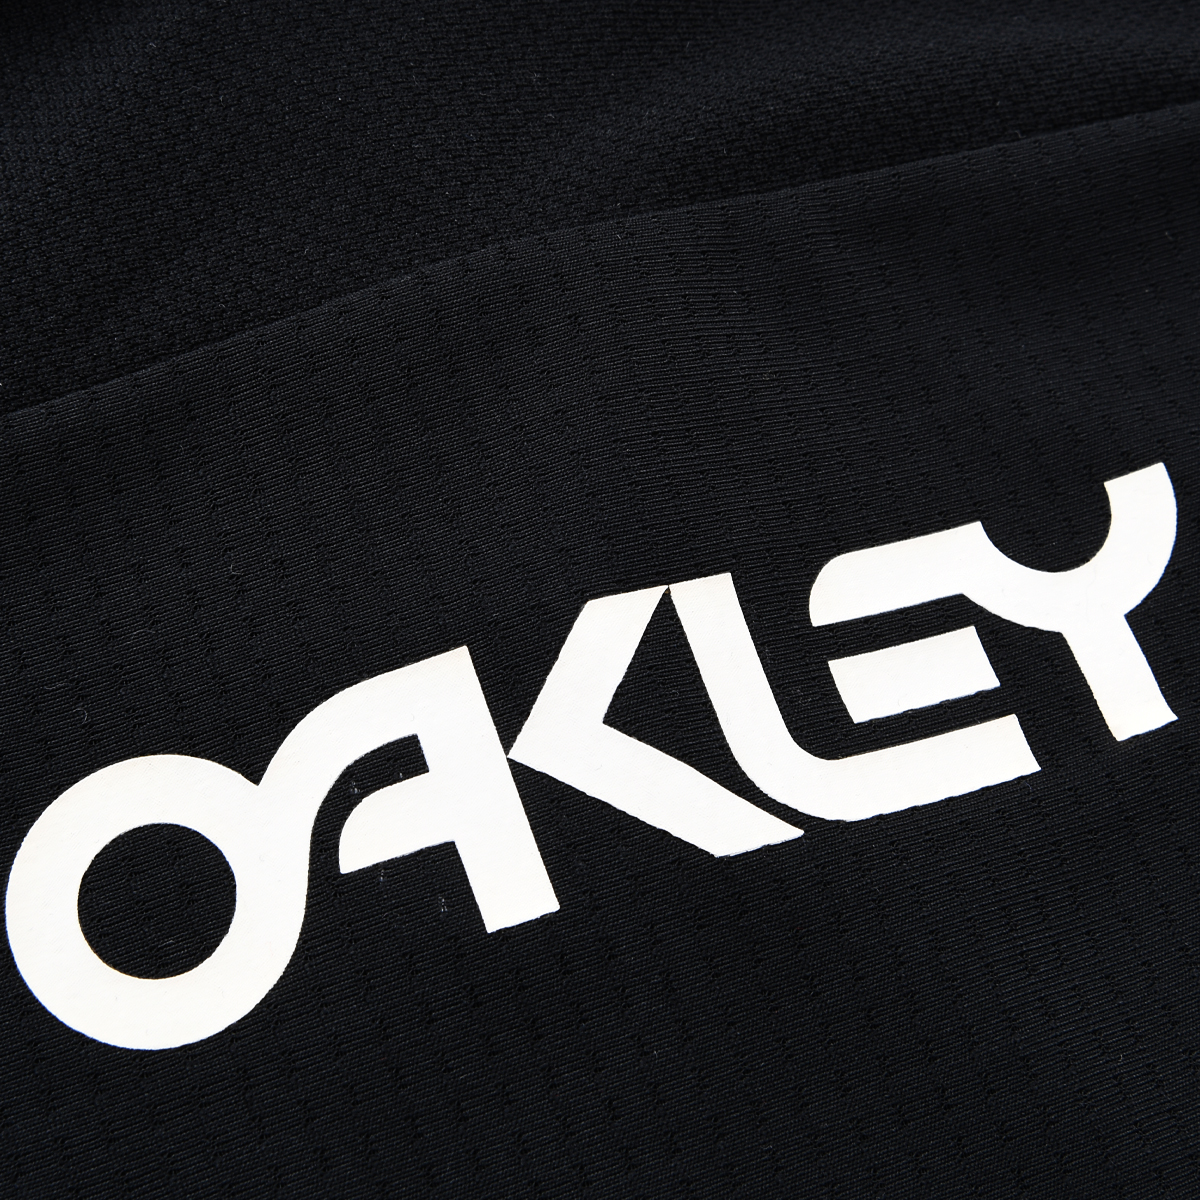 Remera Ciclismo Oakley Cascade Trail Hombre,  image number null